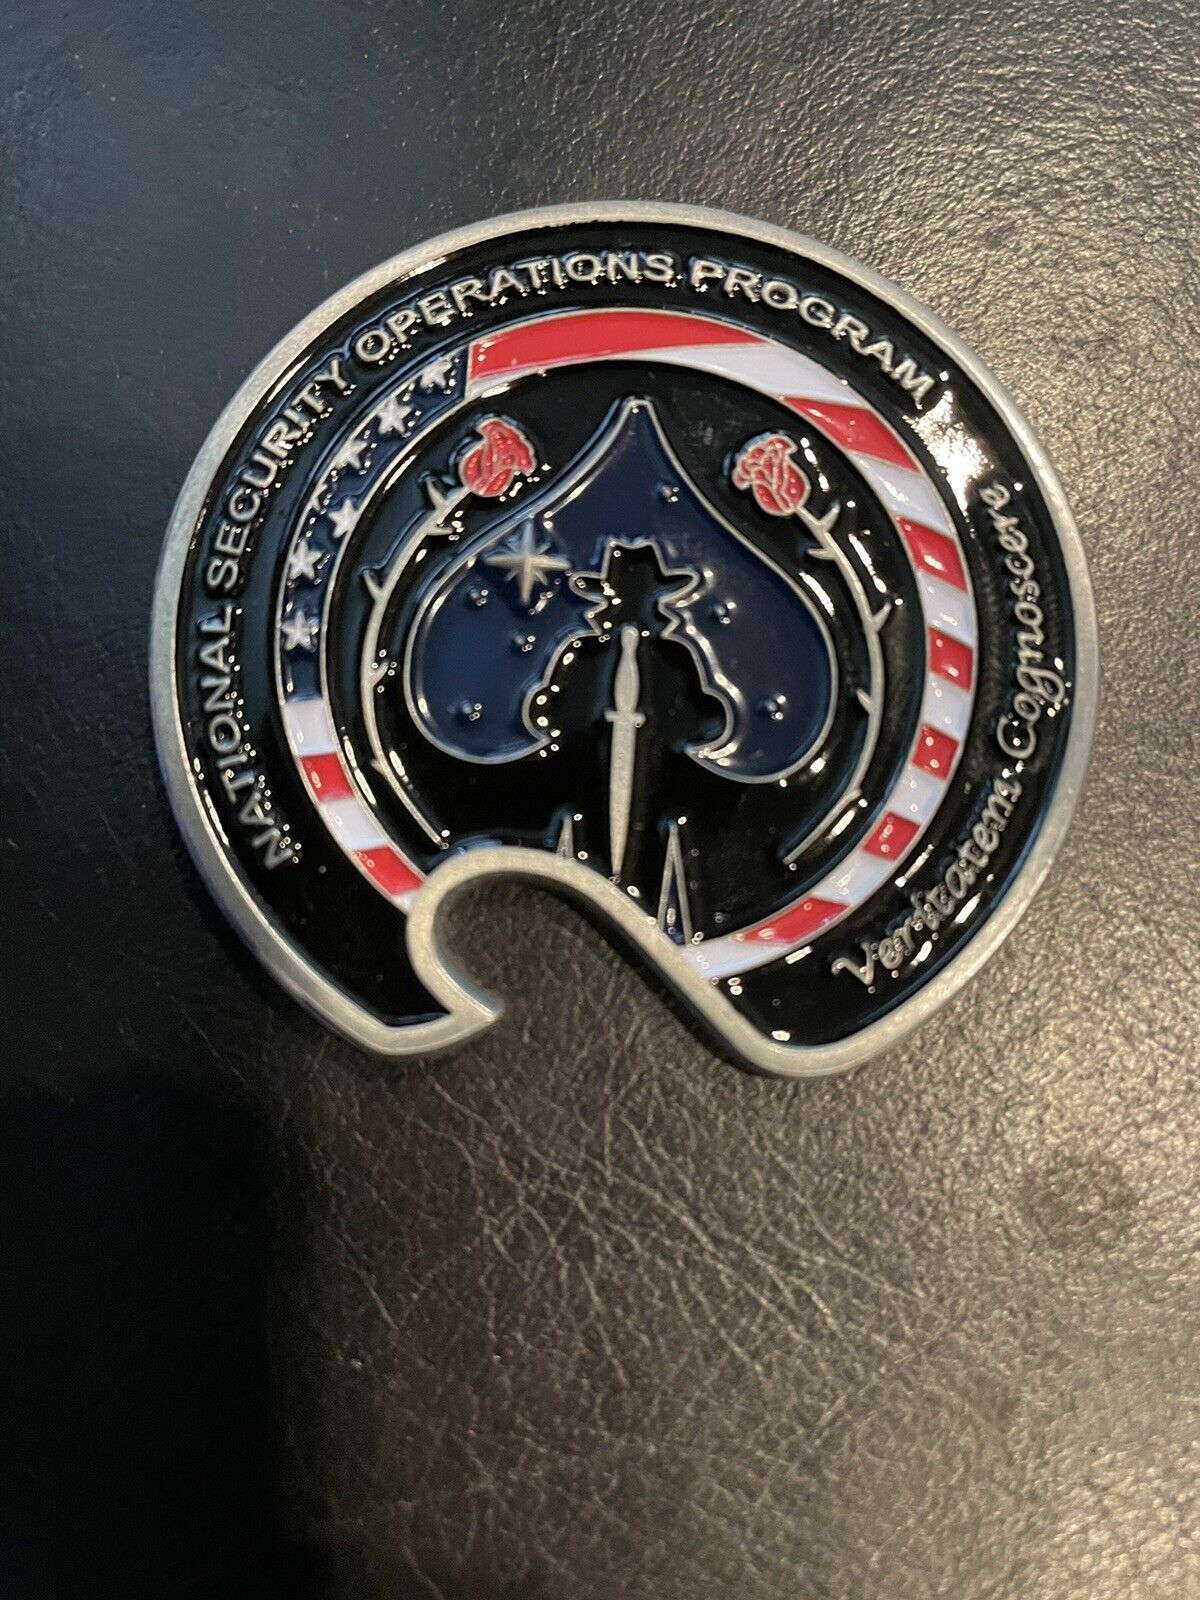 Extremely rare HSI/CIA challenge coin